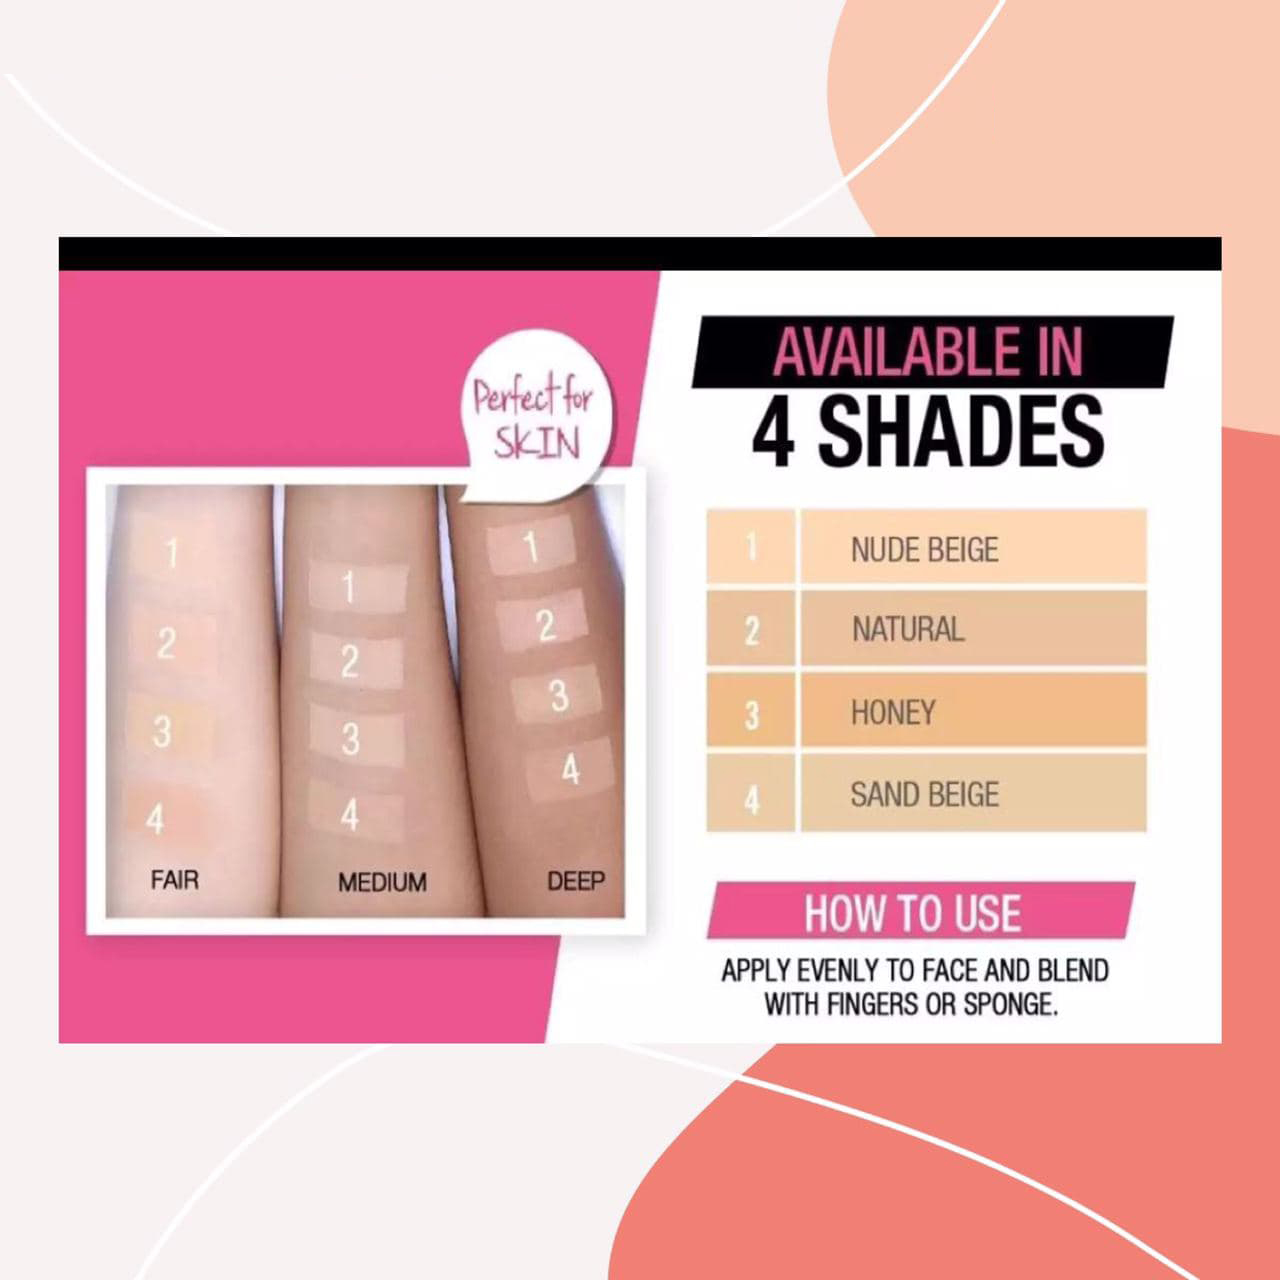 Chase Value - Super Savings of Rs.214/- Maybelline White Super Fresh UV  Whitening Long-Lasting Two-Way Cake For Instant Touch-Ups. Shop Now:  https://bit.ly/2Bzq9PZ #Cosmetics #InStoresAndOnline #BuyNow #OrderNow  #ShopTillYouDrop #BuyOnline #ShopOnline ...